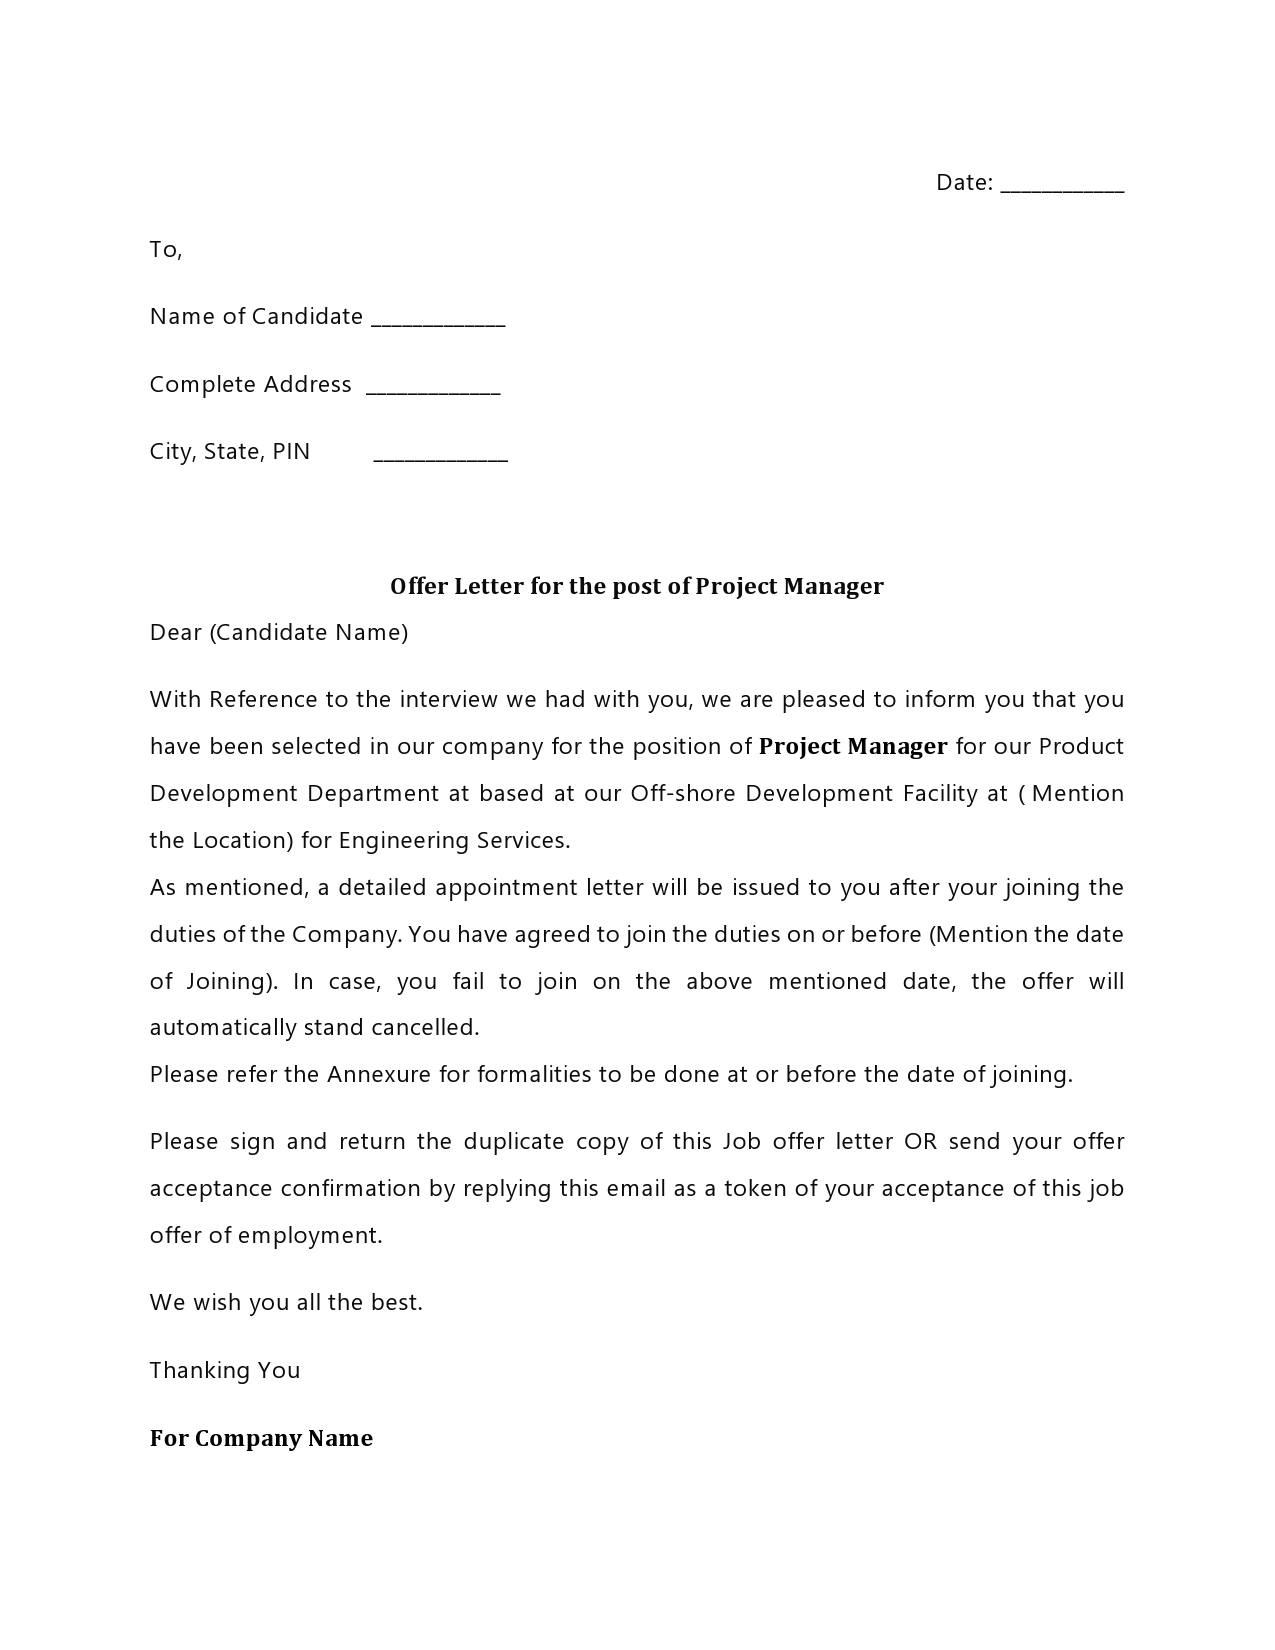 Free employment offer letter template 10